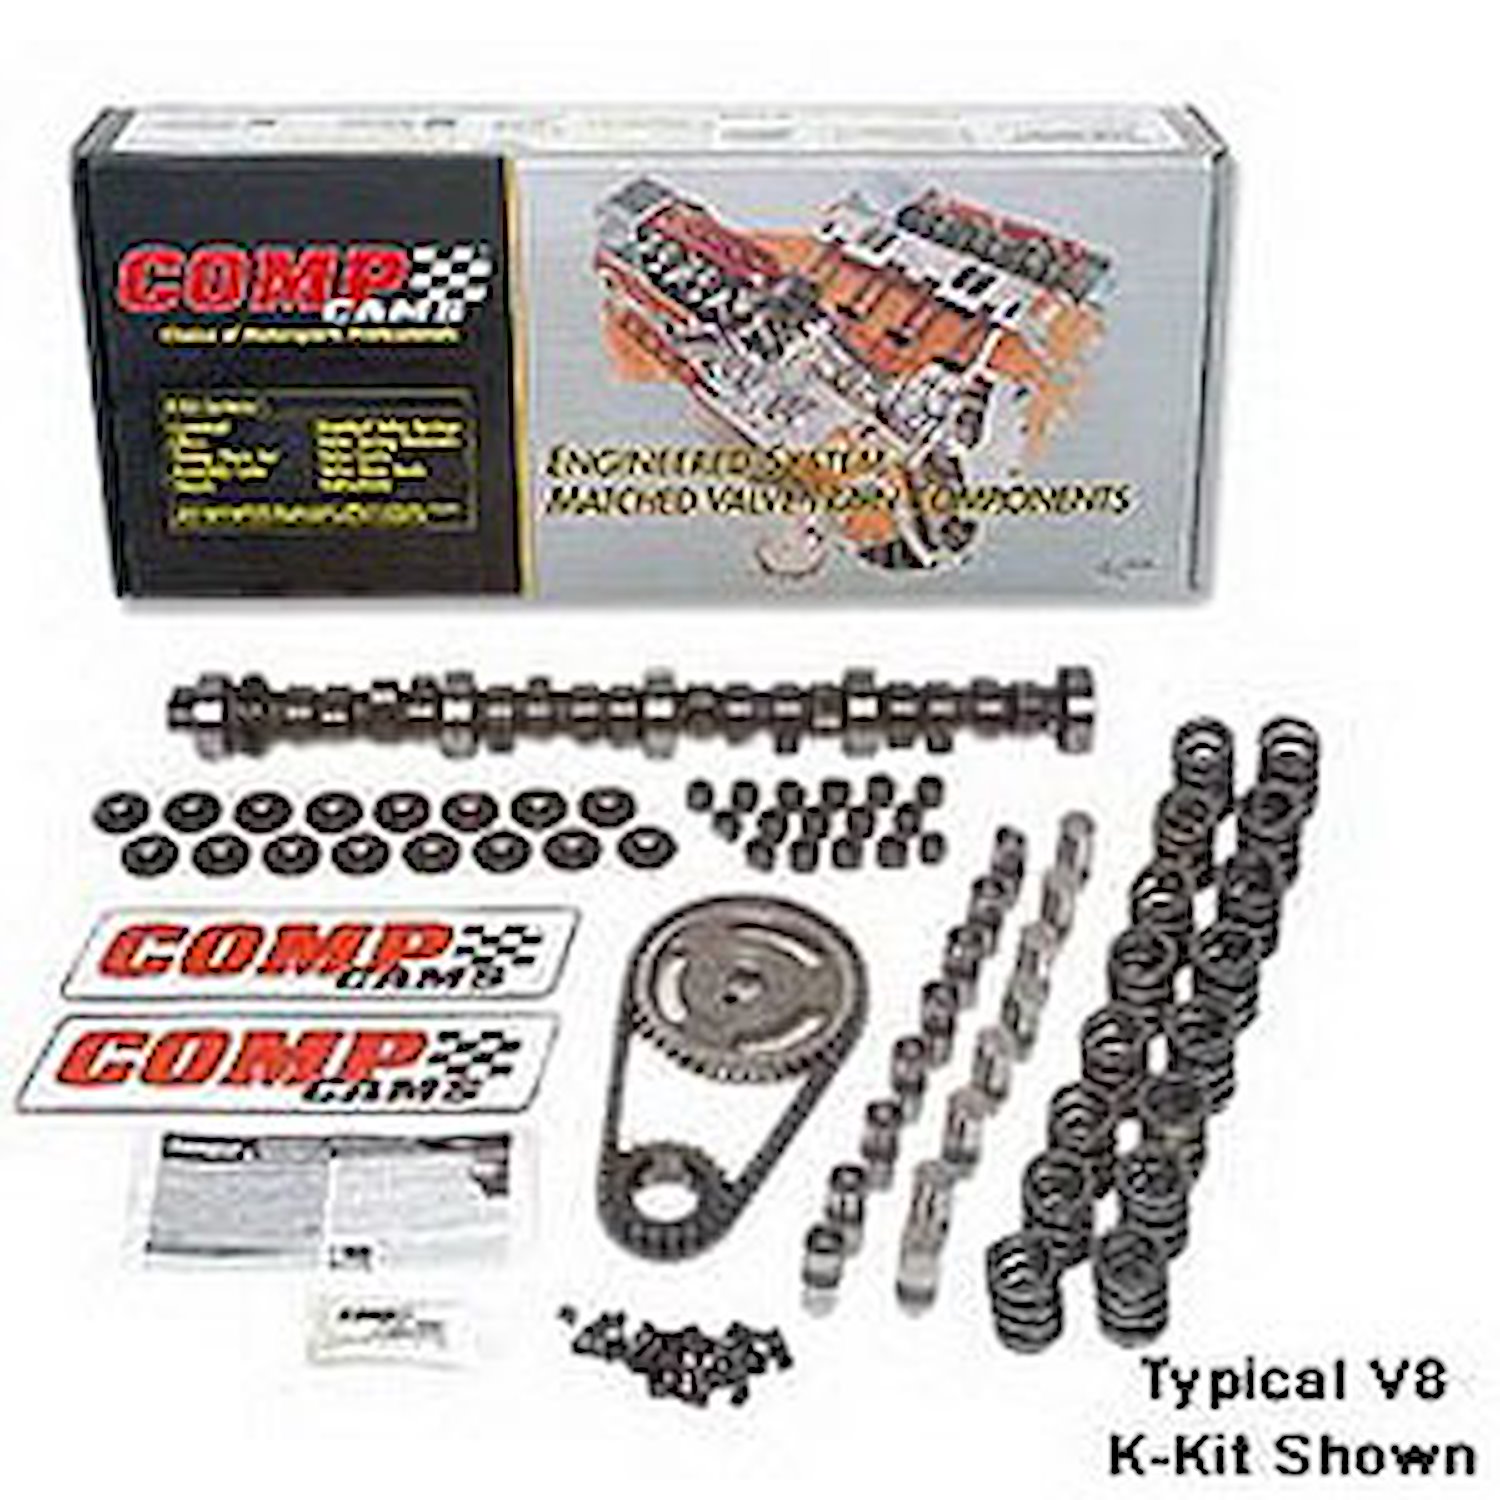 High Energy 260H Hydraulic Flat Tappet Camshaft Complete Kit Lift: .440" /.440" Duration: 260°/260° RPM Range: 1000-5000